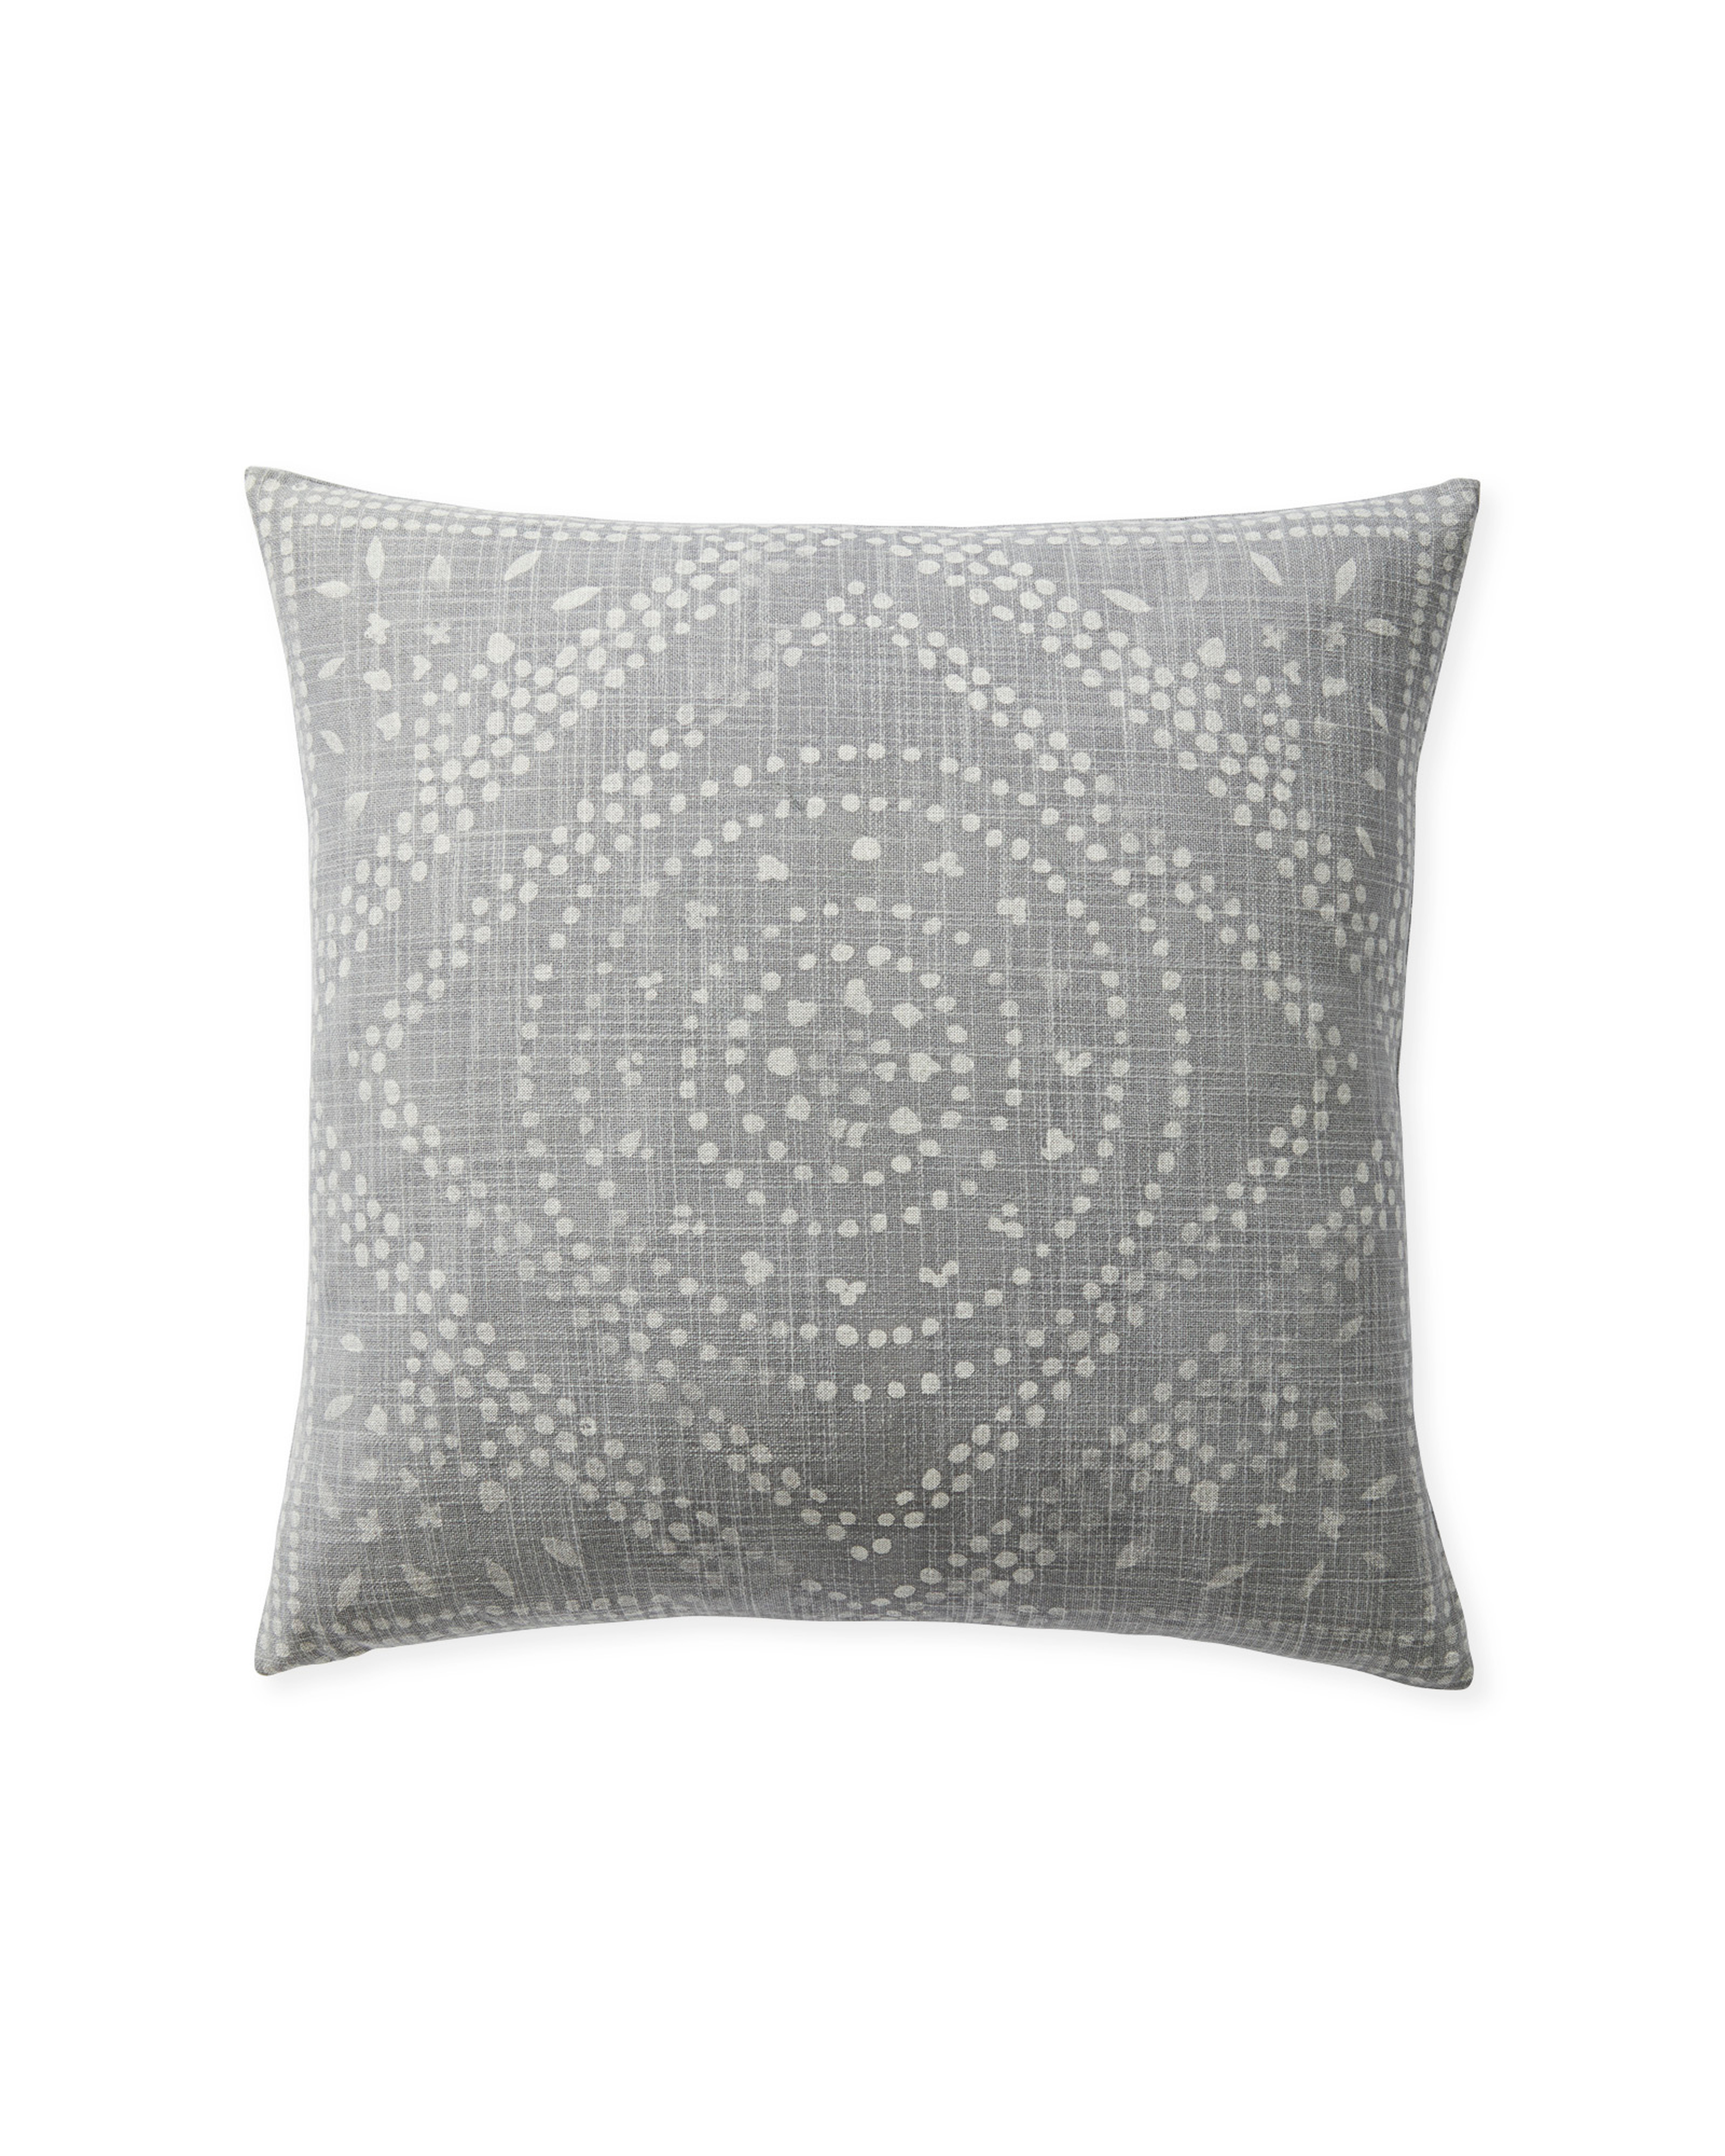 Camille Diamond Medallion 20"SQ. Pillow Cover - Smoke - Insert sold separately - Serena and Lily